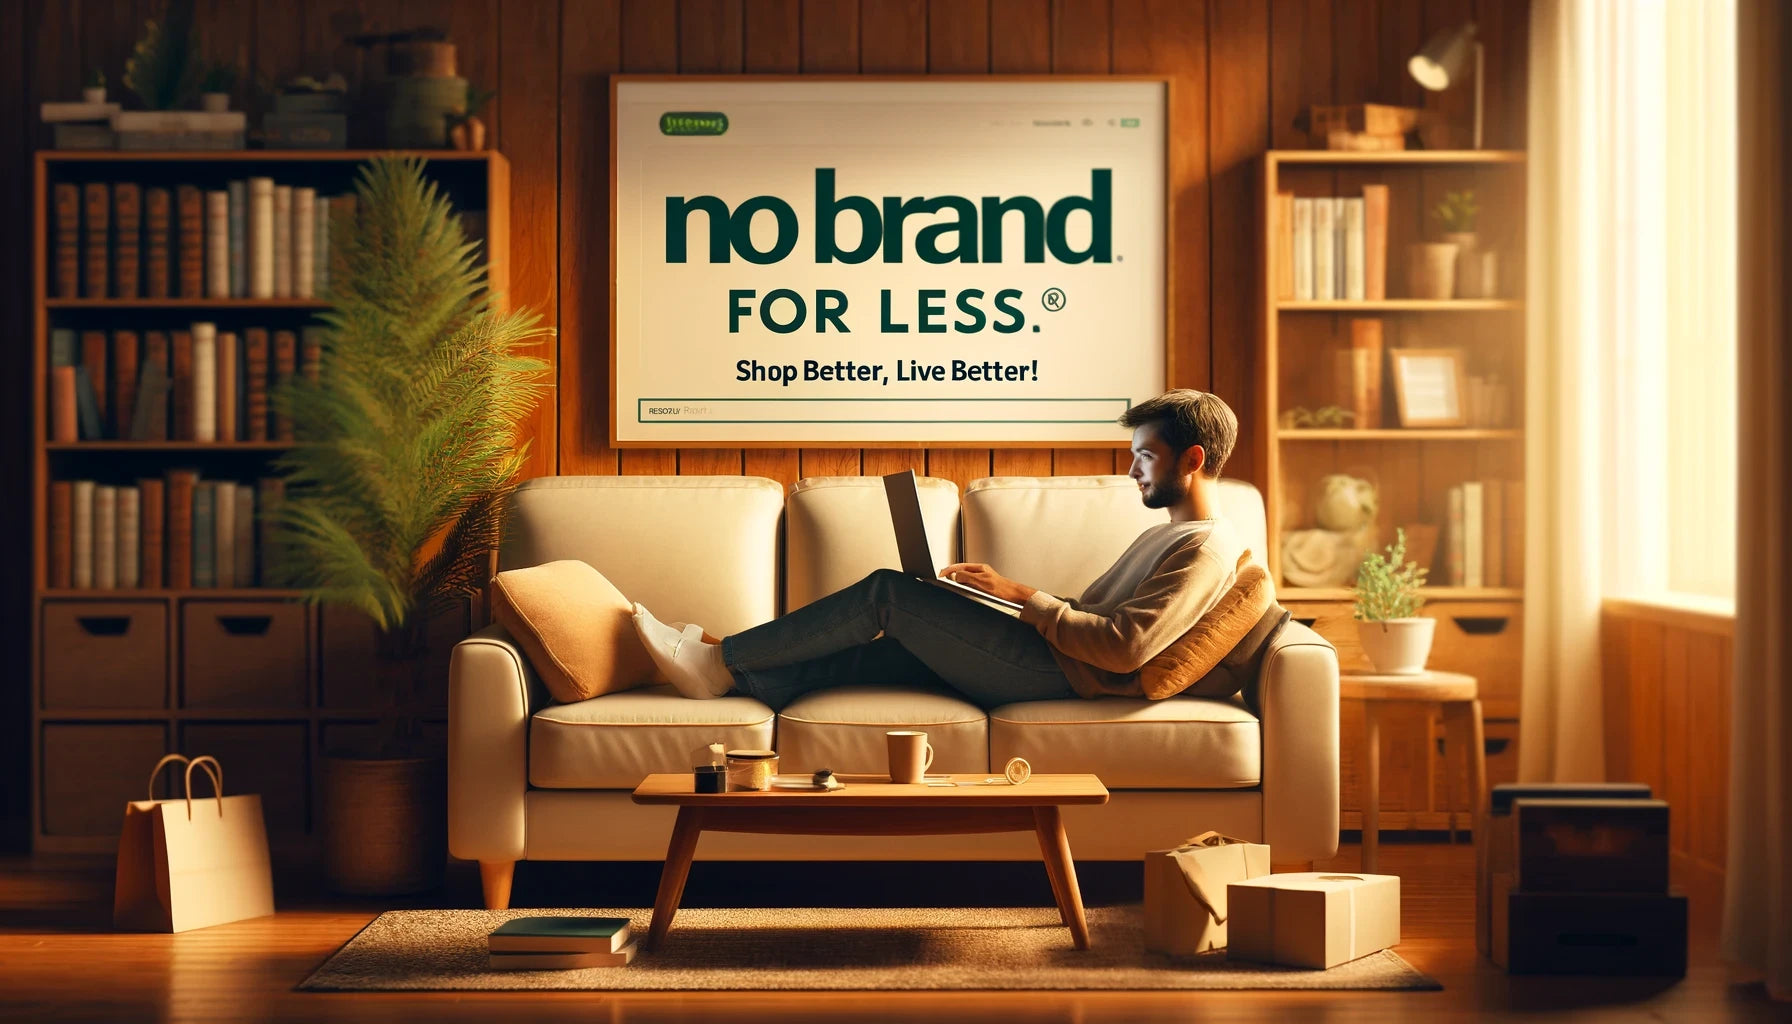 How to Find Your Favorite Products on nobrandforless.com